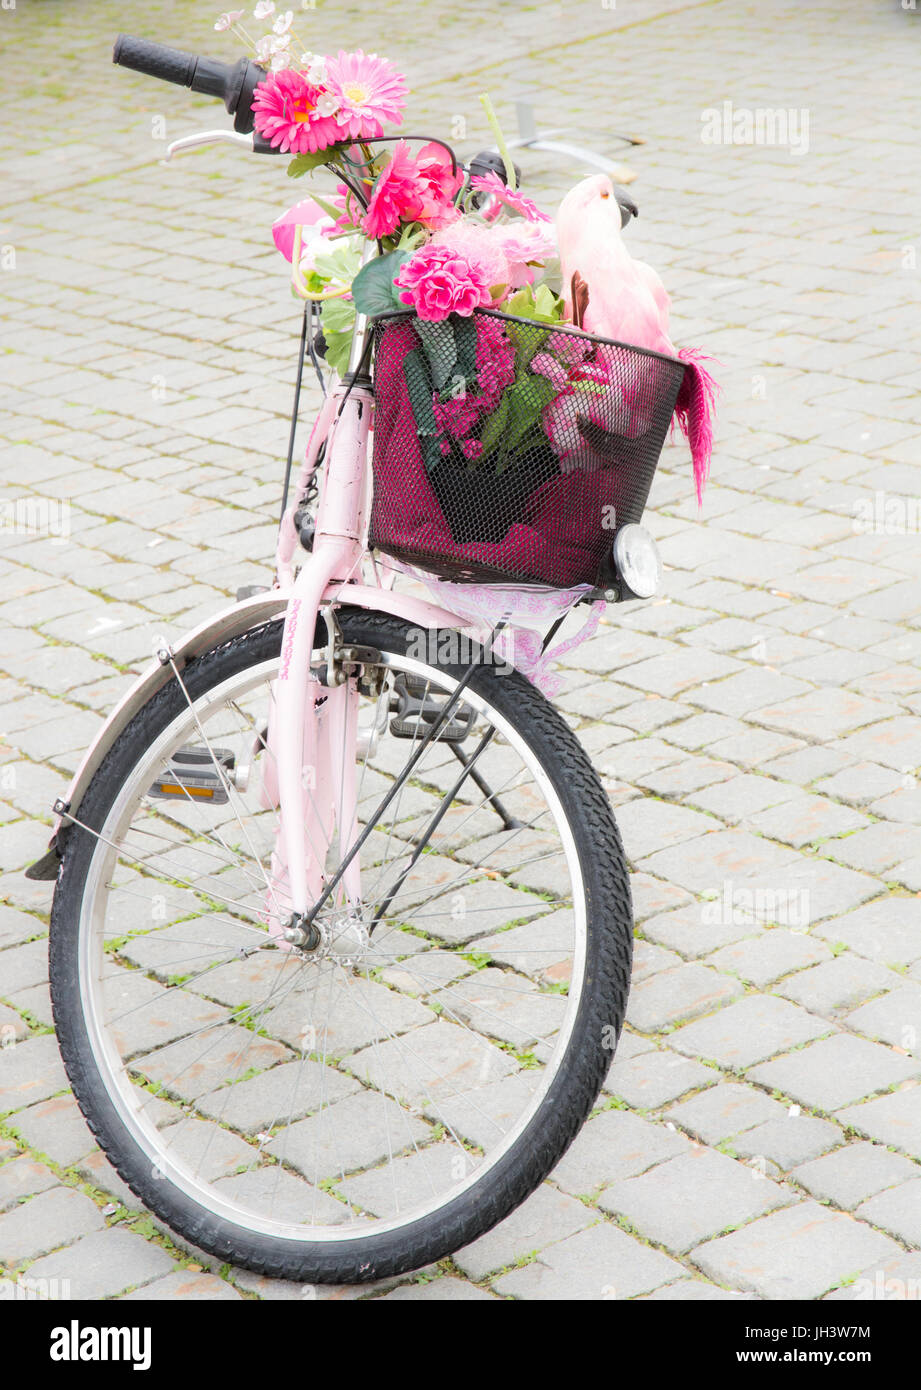 KEMPTEN, GERMANY - JUNE 9: Pink bycicle with flower and parrot deco in the bike basket seen in Kepmten, Germany on June 9, 2017. Stock Photo